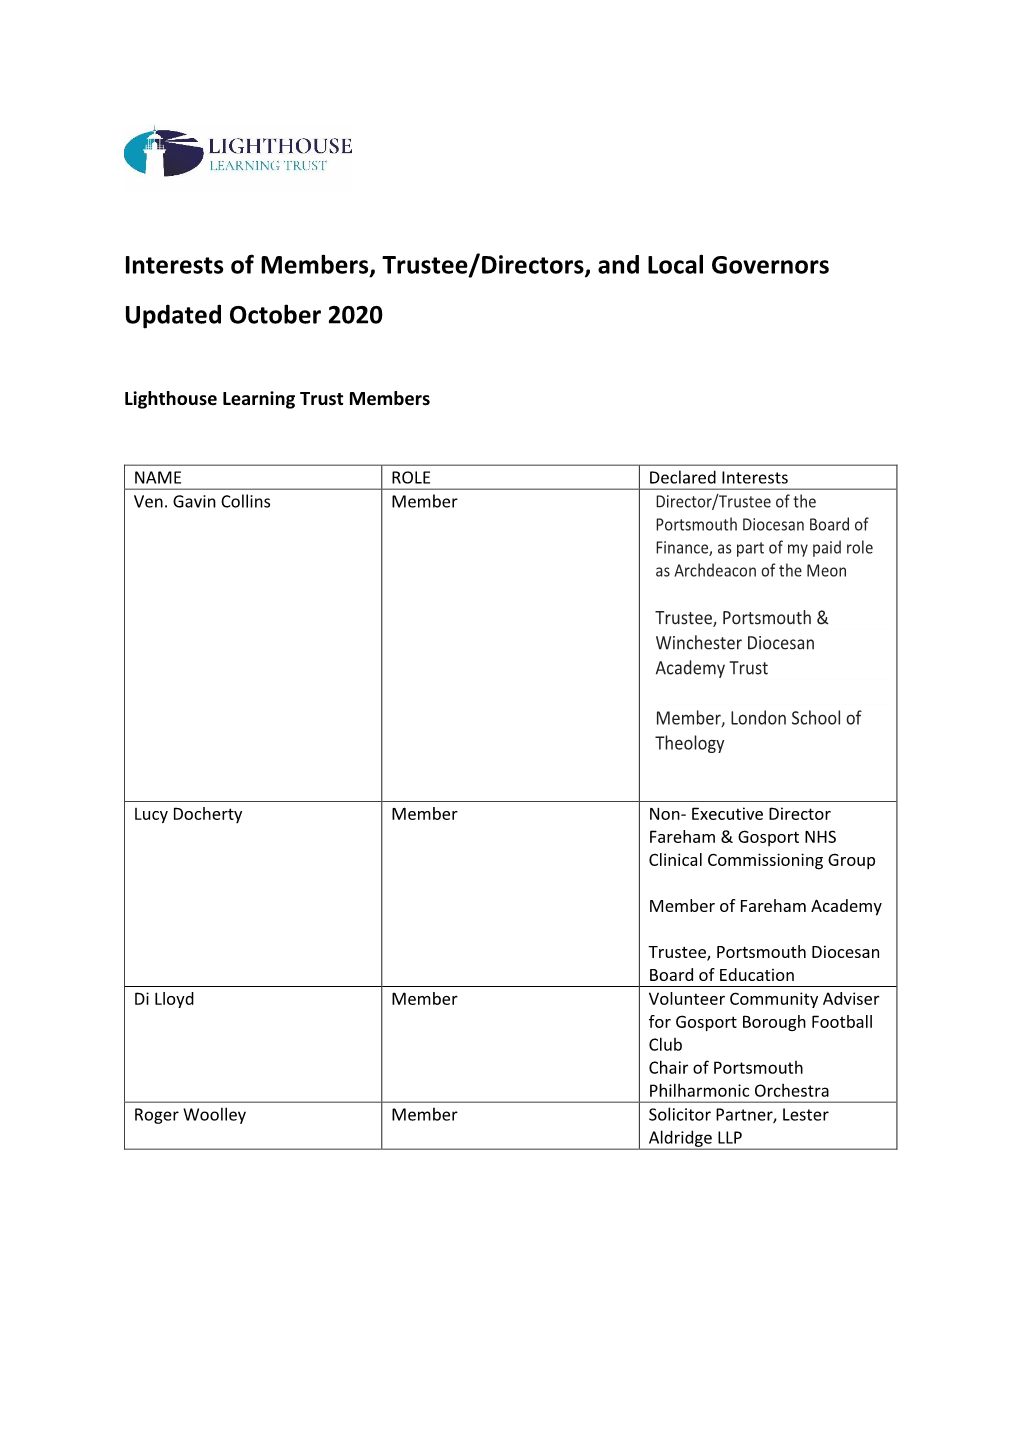 Interests of Members, Trustee/Directors, and Local Governors Updated October 2020